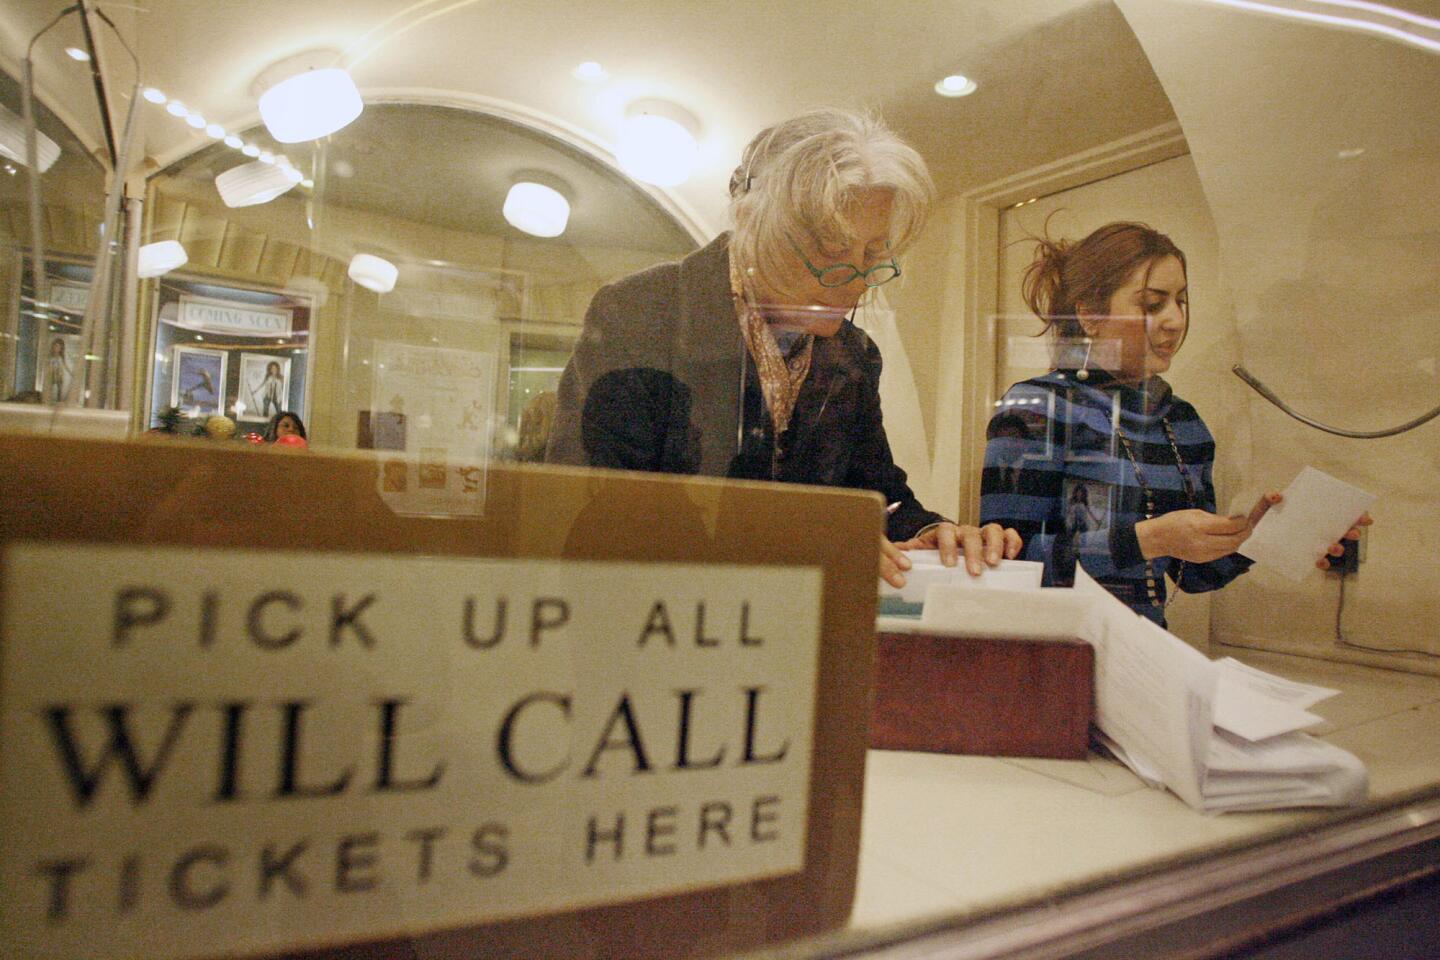 Mary Kathryn Walsh, left, and Mariam Panasyan distribute tickets to customers for the "Territory of Jazz" performance at the Alex Theatre in Glendale on Friday, December 28, 2012.